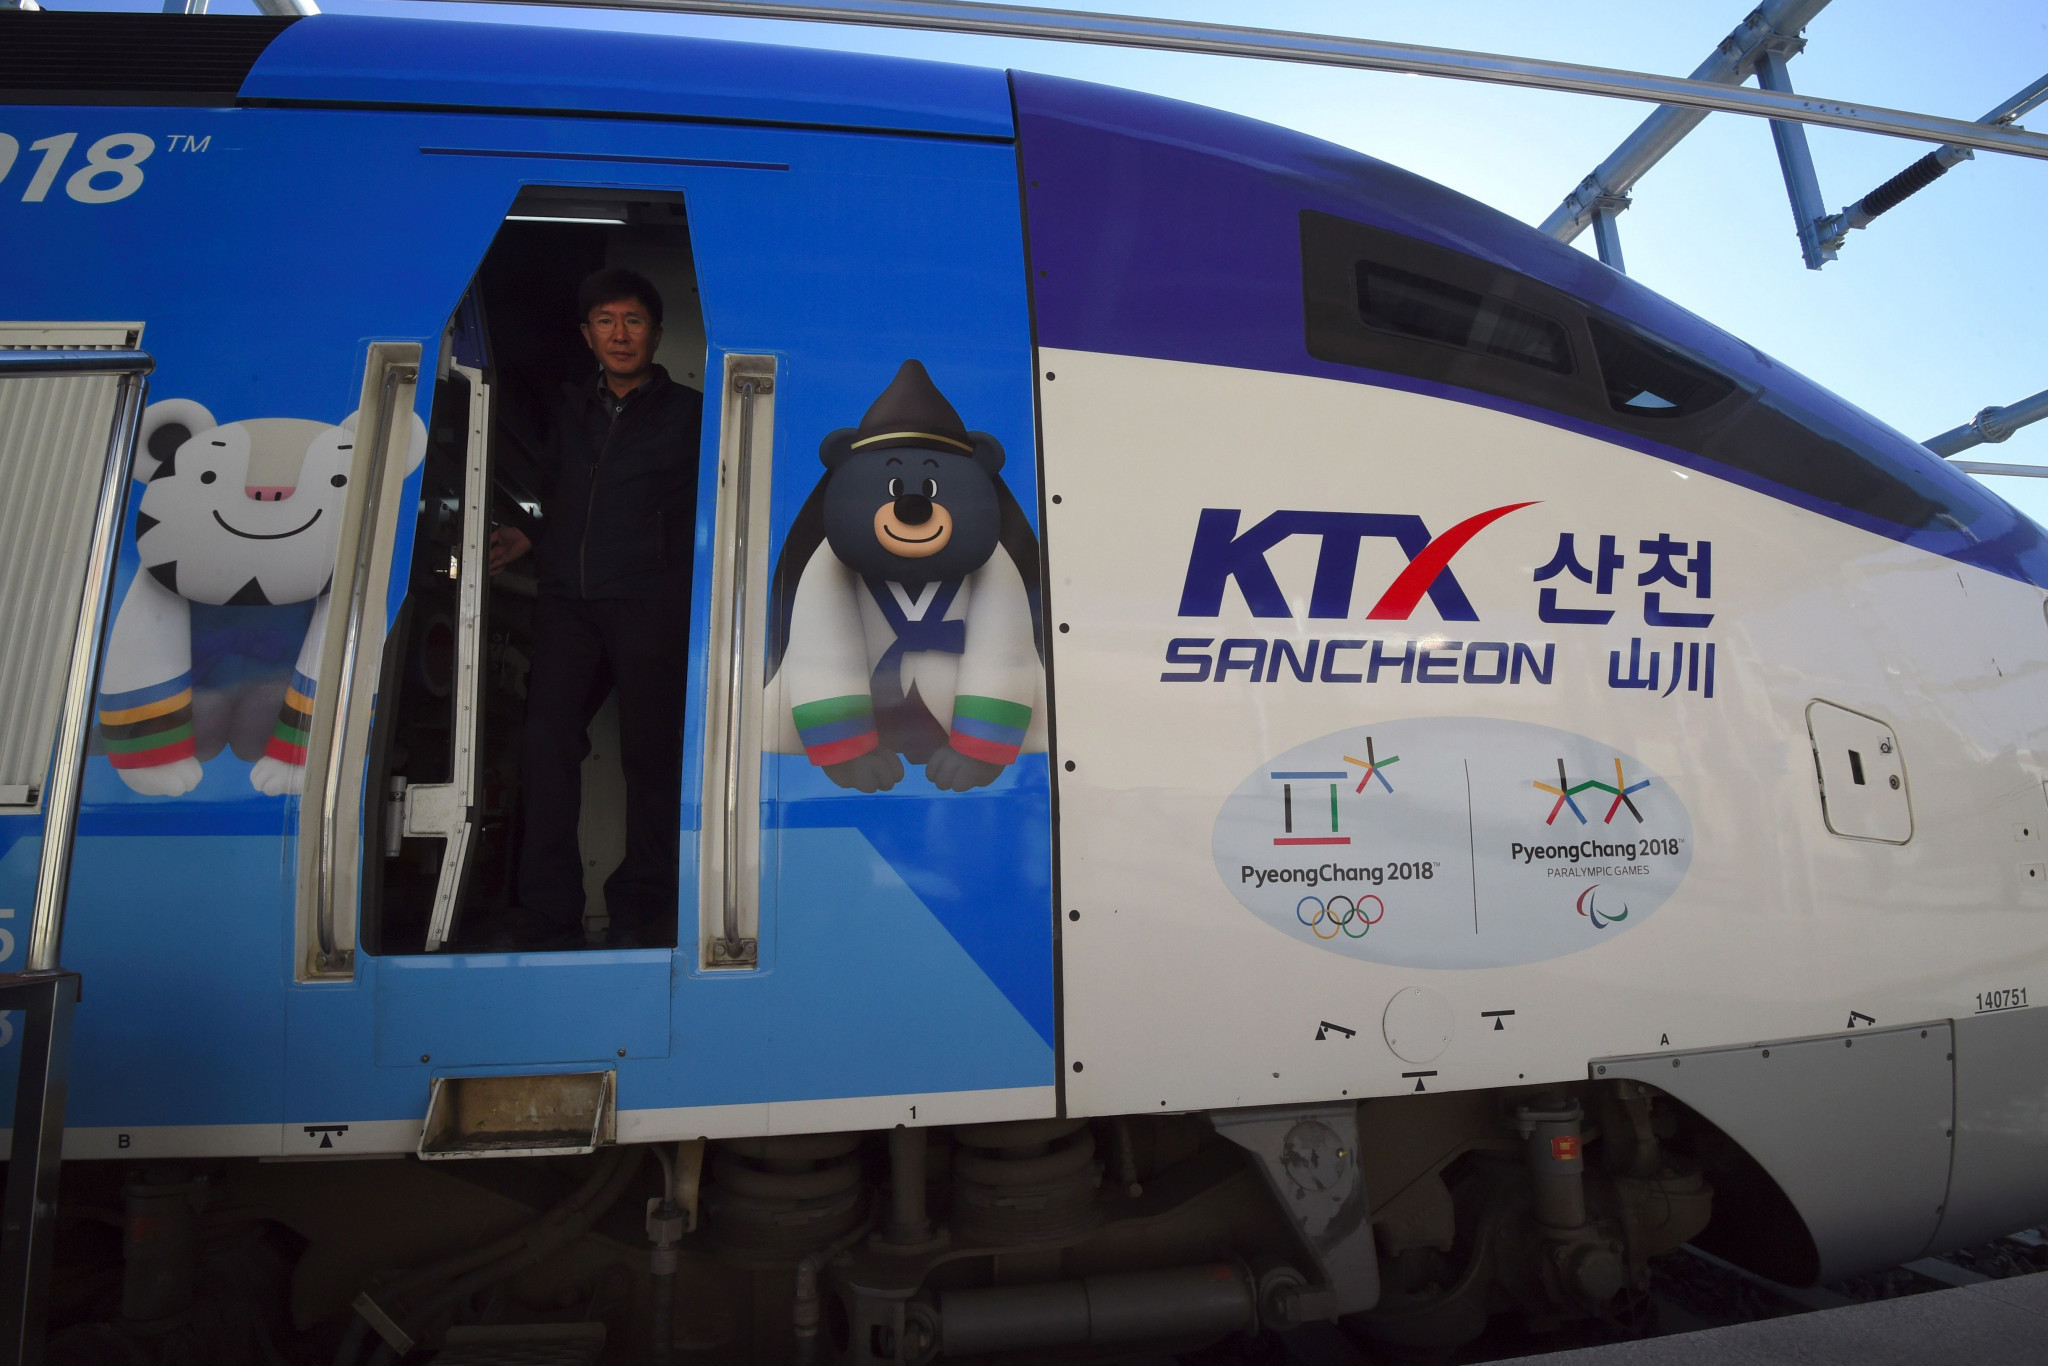 Lunar New Year could cause chaos for Pyeongchang 2018 high-speed rail users